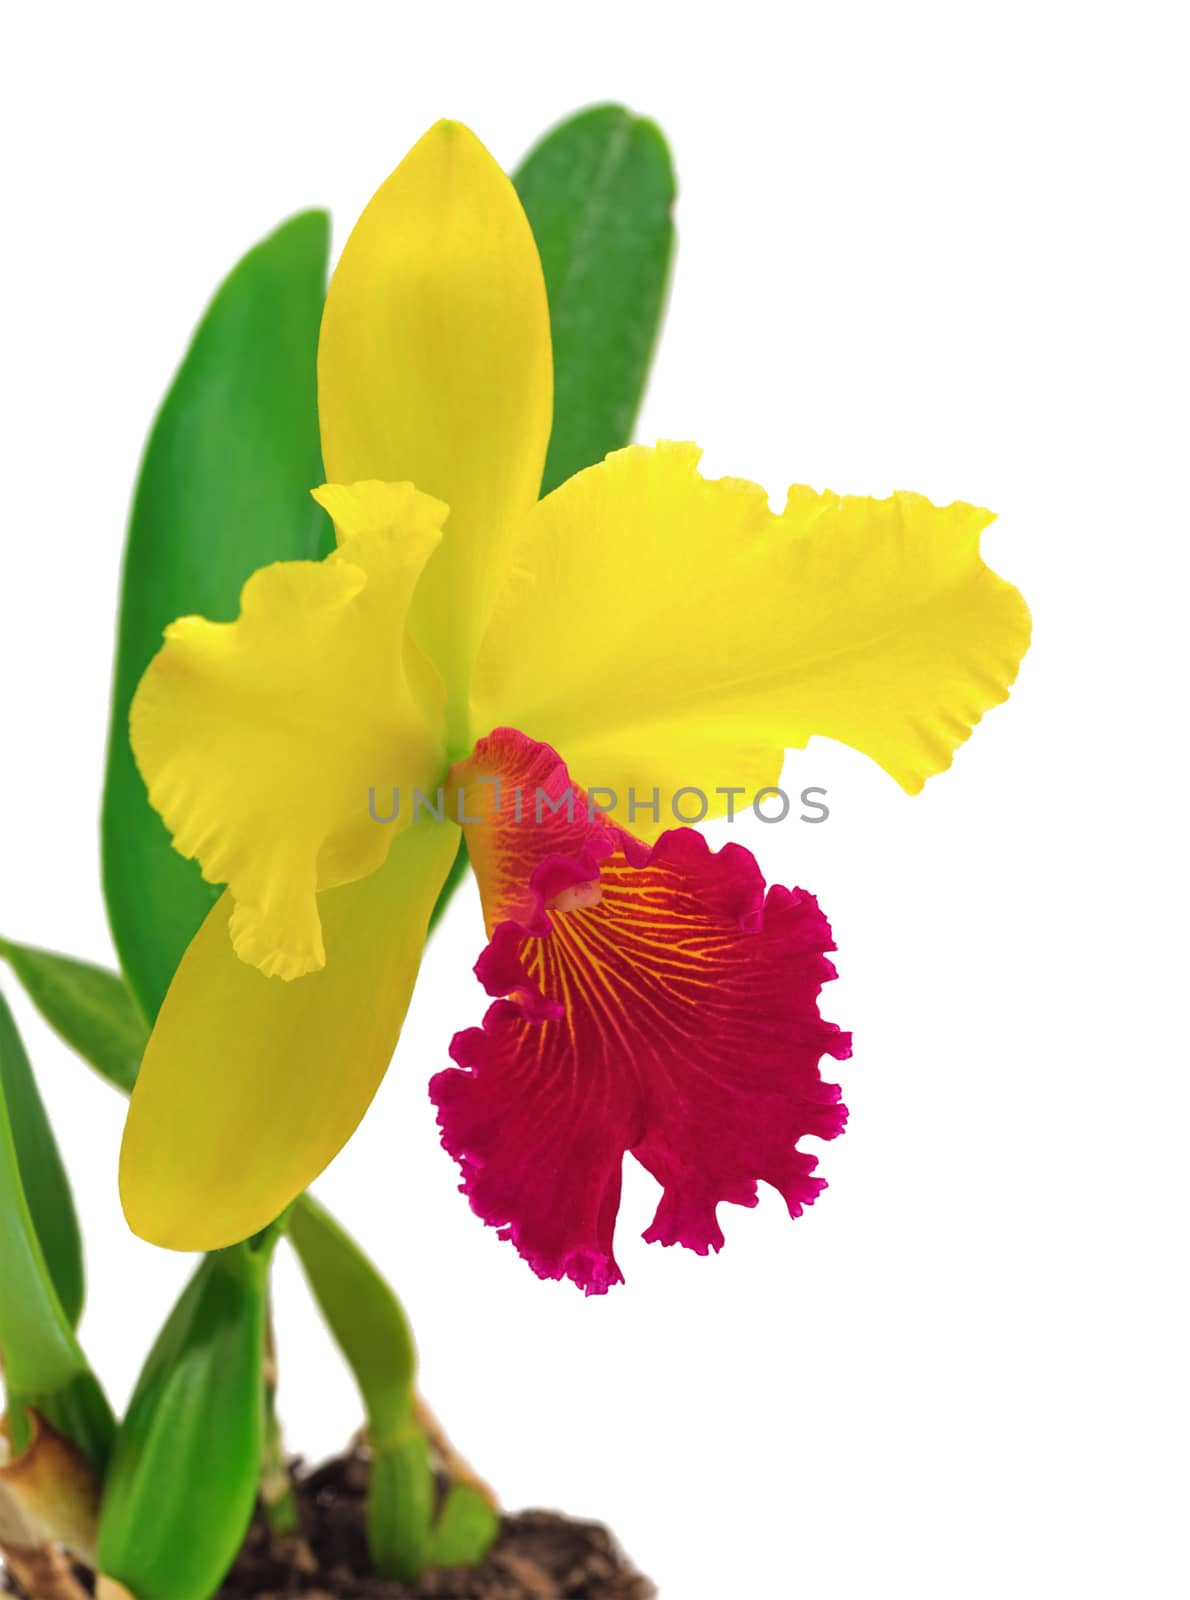 Flower cattleya orchid isolated on a white background